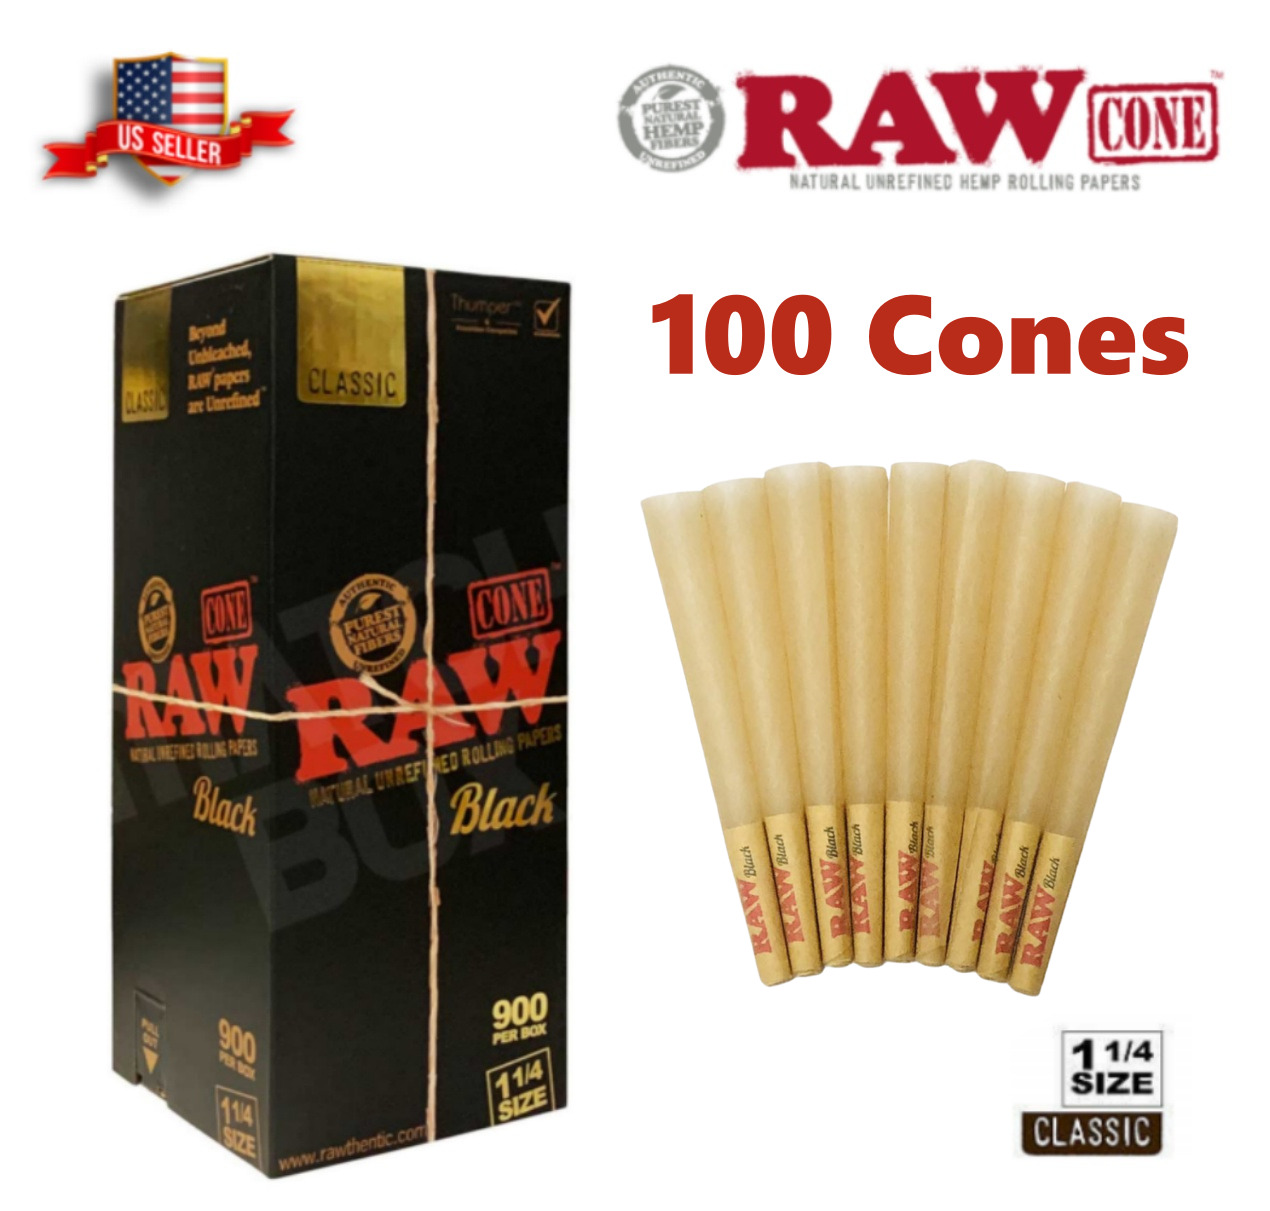 Authentic RAW Black 1 1/4 Size Pre-Rolled Cones 100 Pack & Fast Shipping US